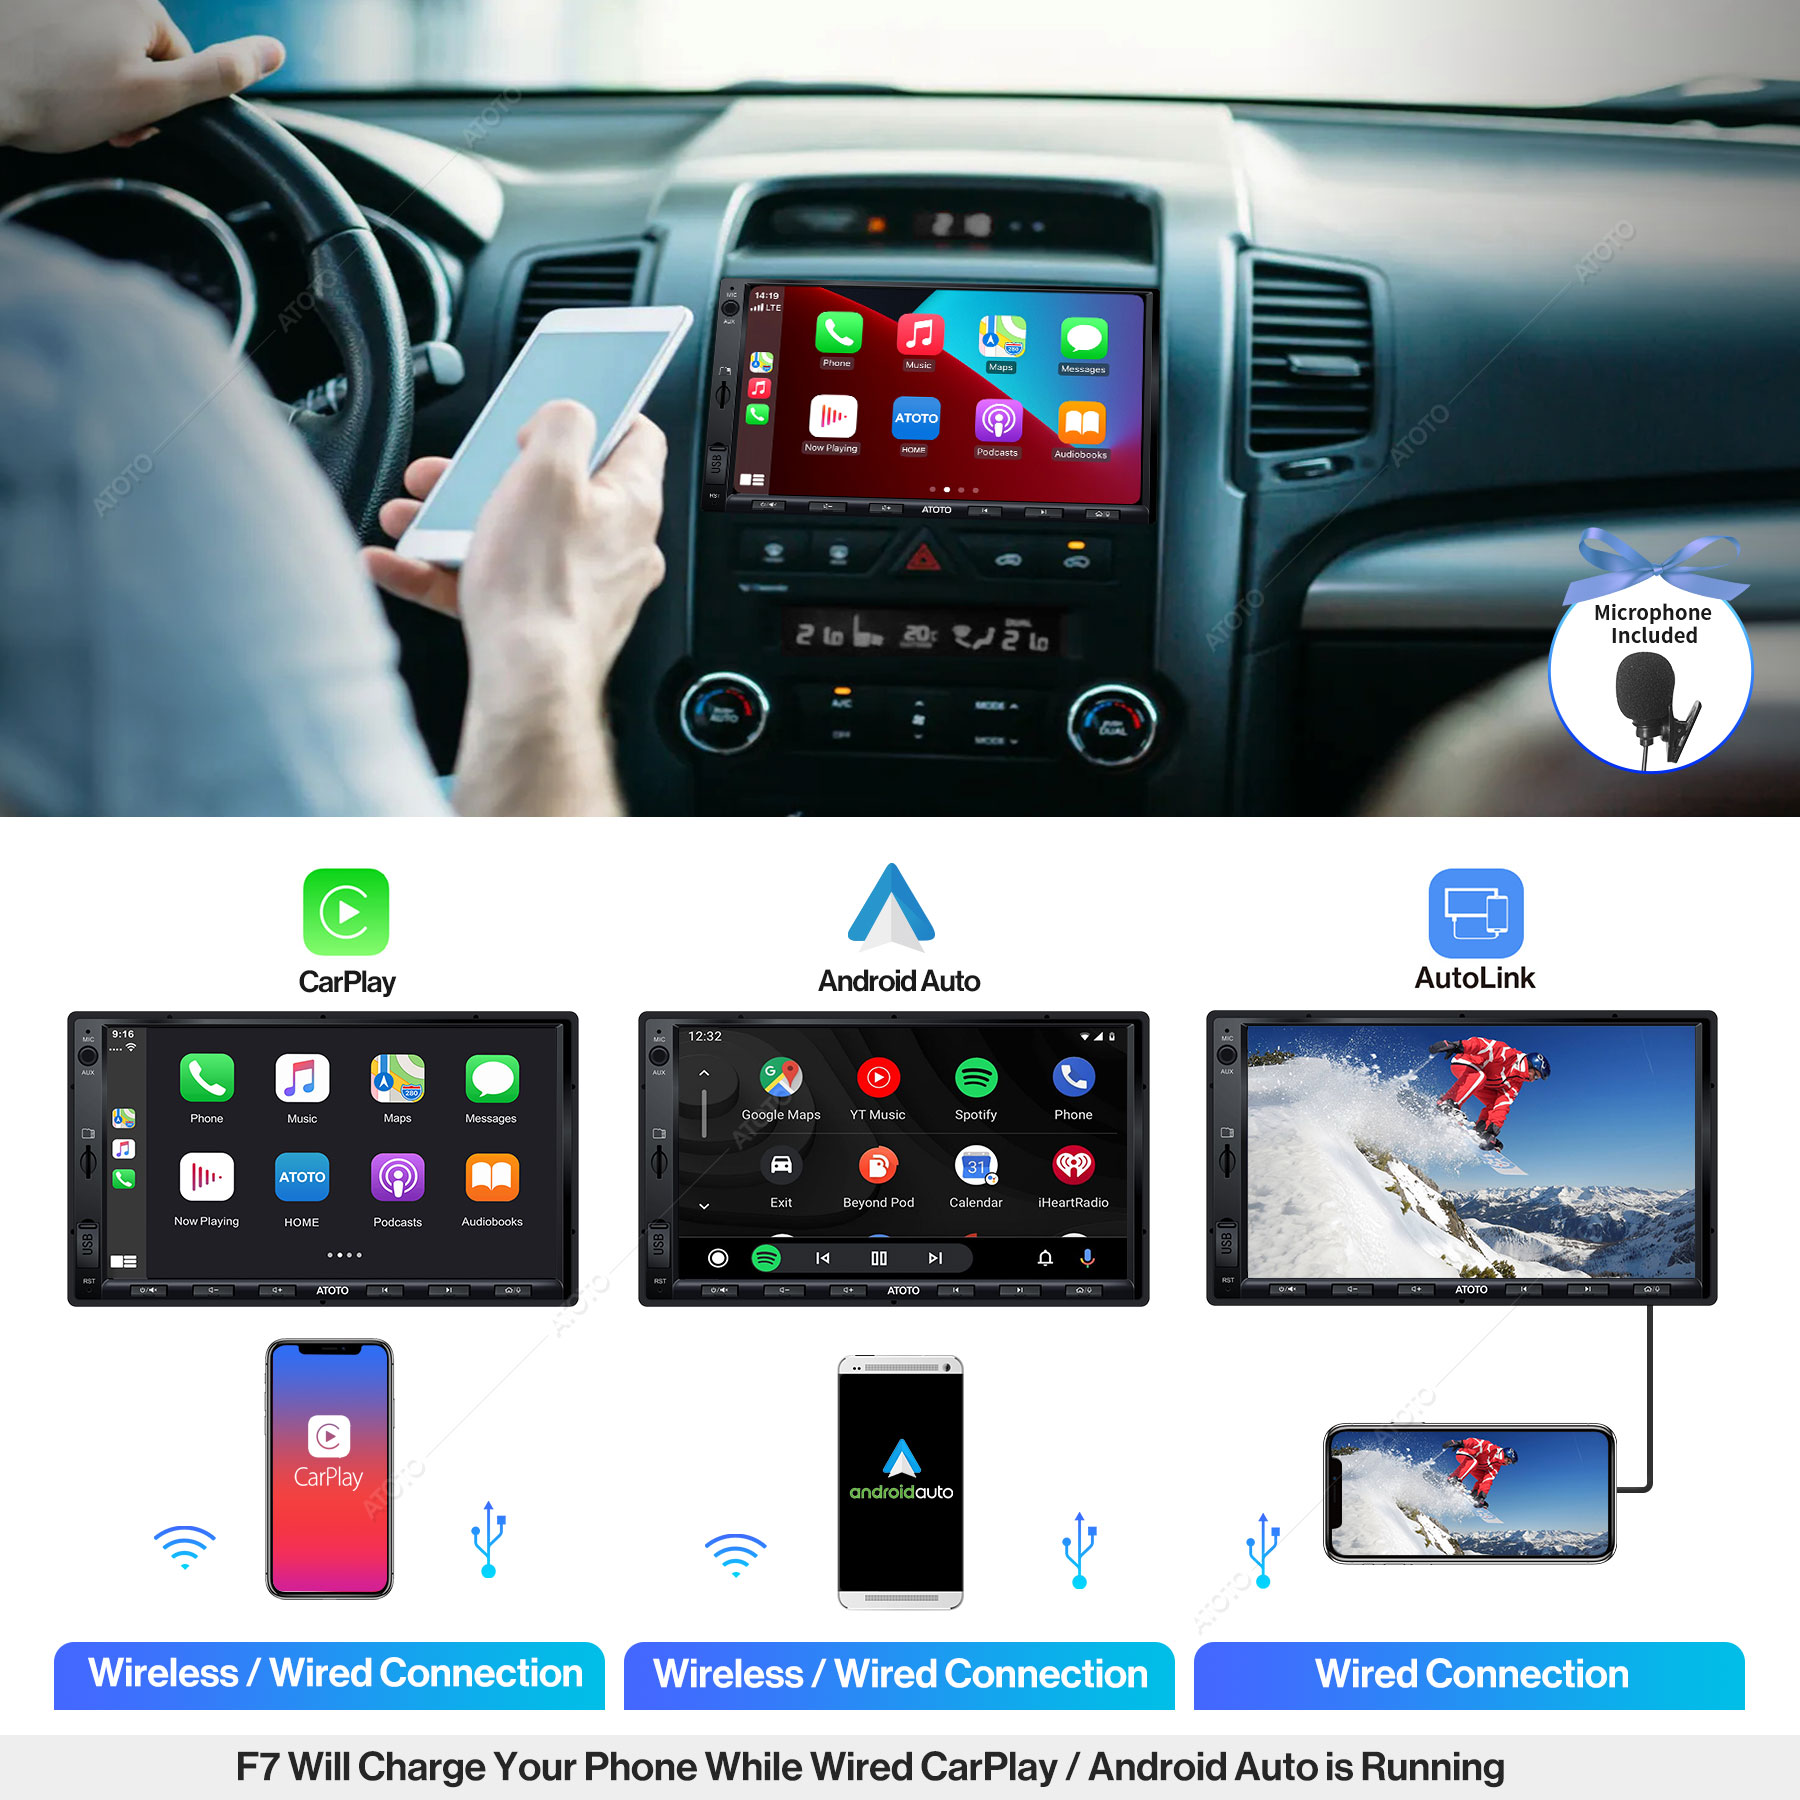 ATOTO F7G2A7XE NA S01 Car Stereo Apple Carplay Android Auto 7 Inch